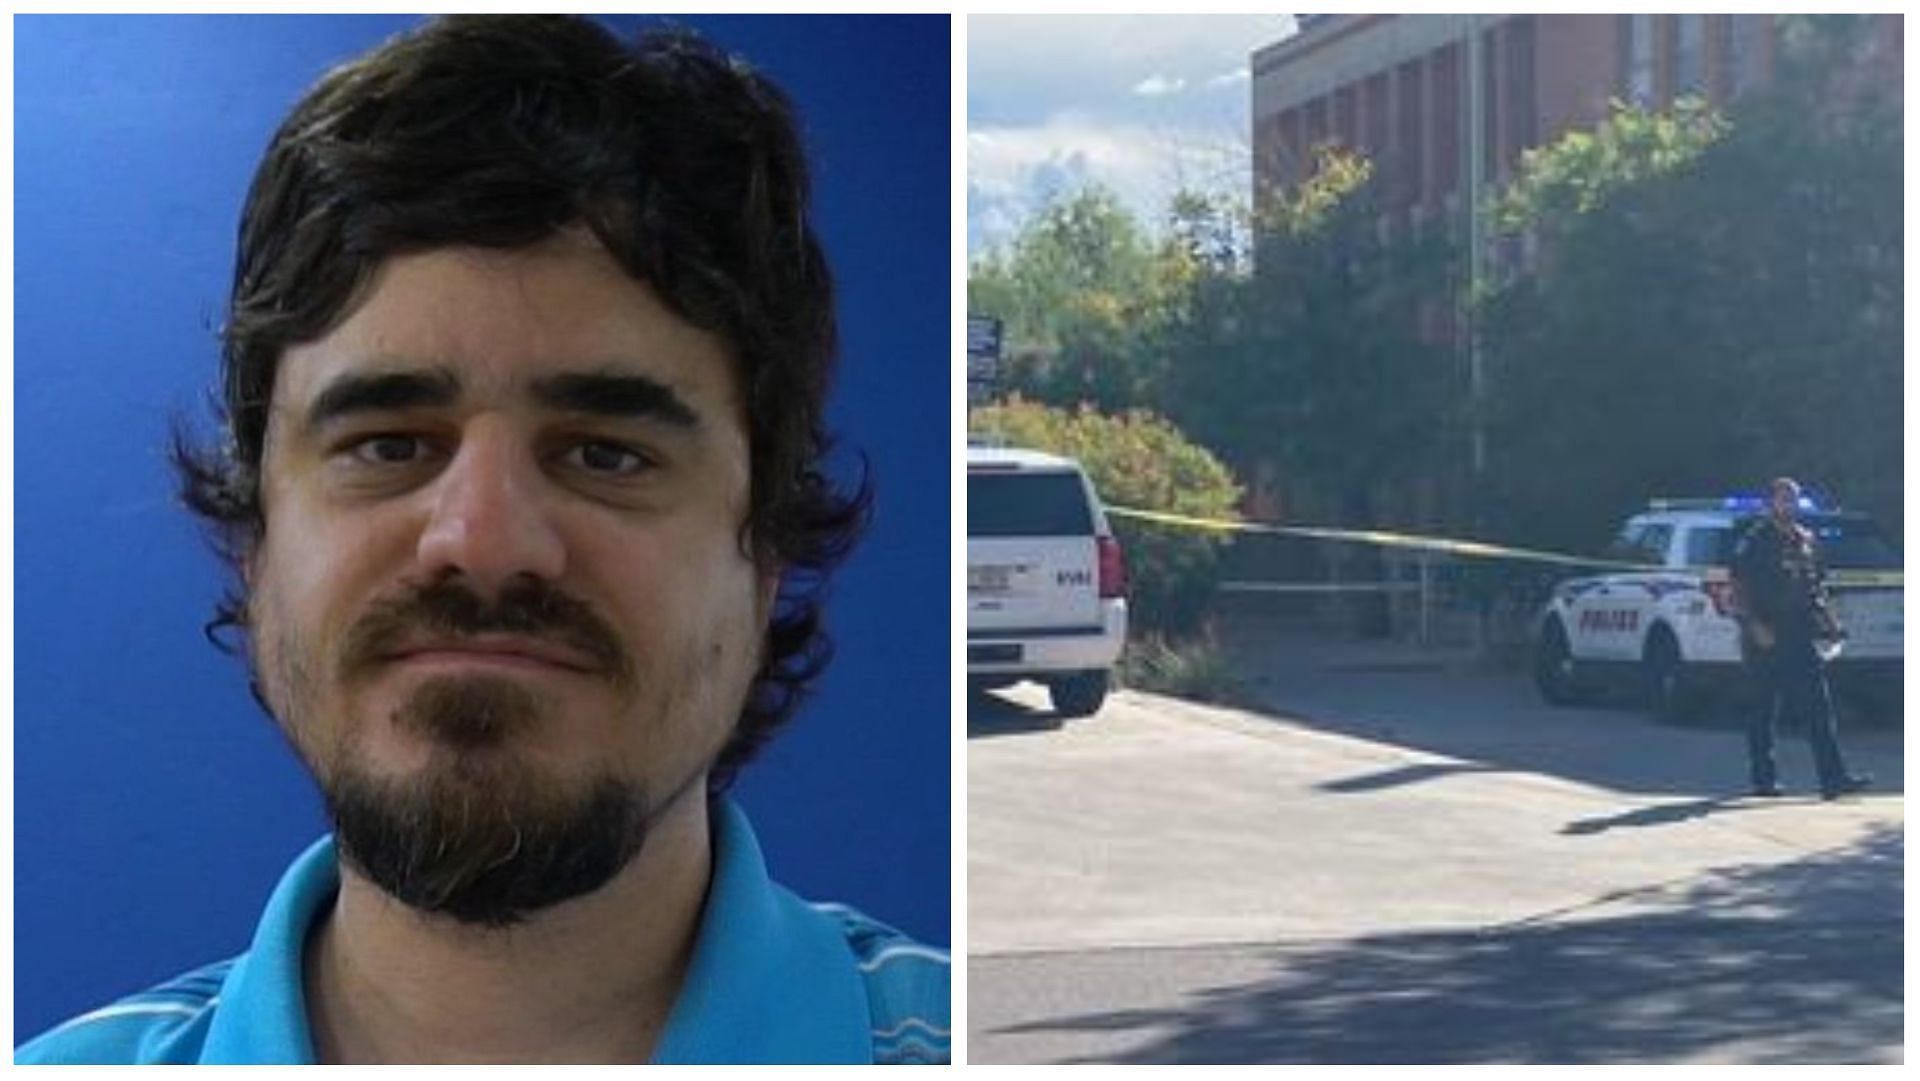 Murad Dervish, former student of University of Arizona arrested after allegedly killing the professor. (Image via Twitter/DanMarries/MaryColeman)